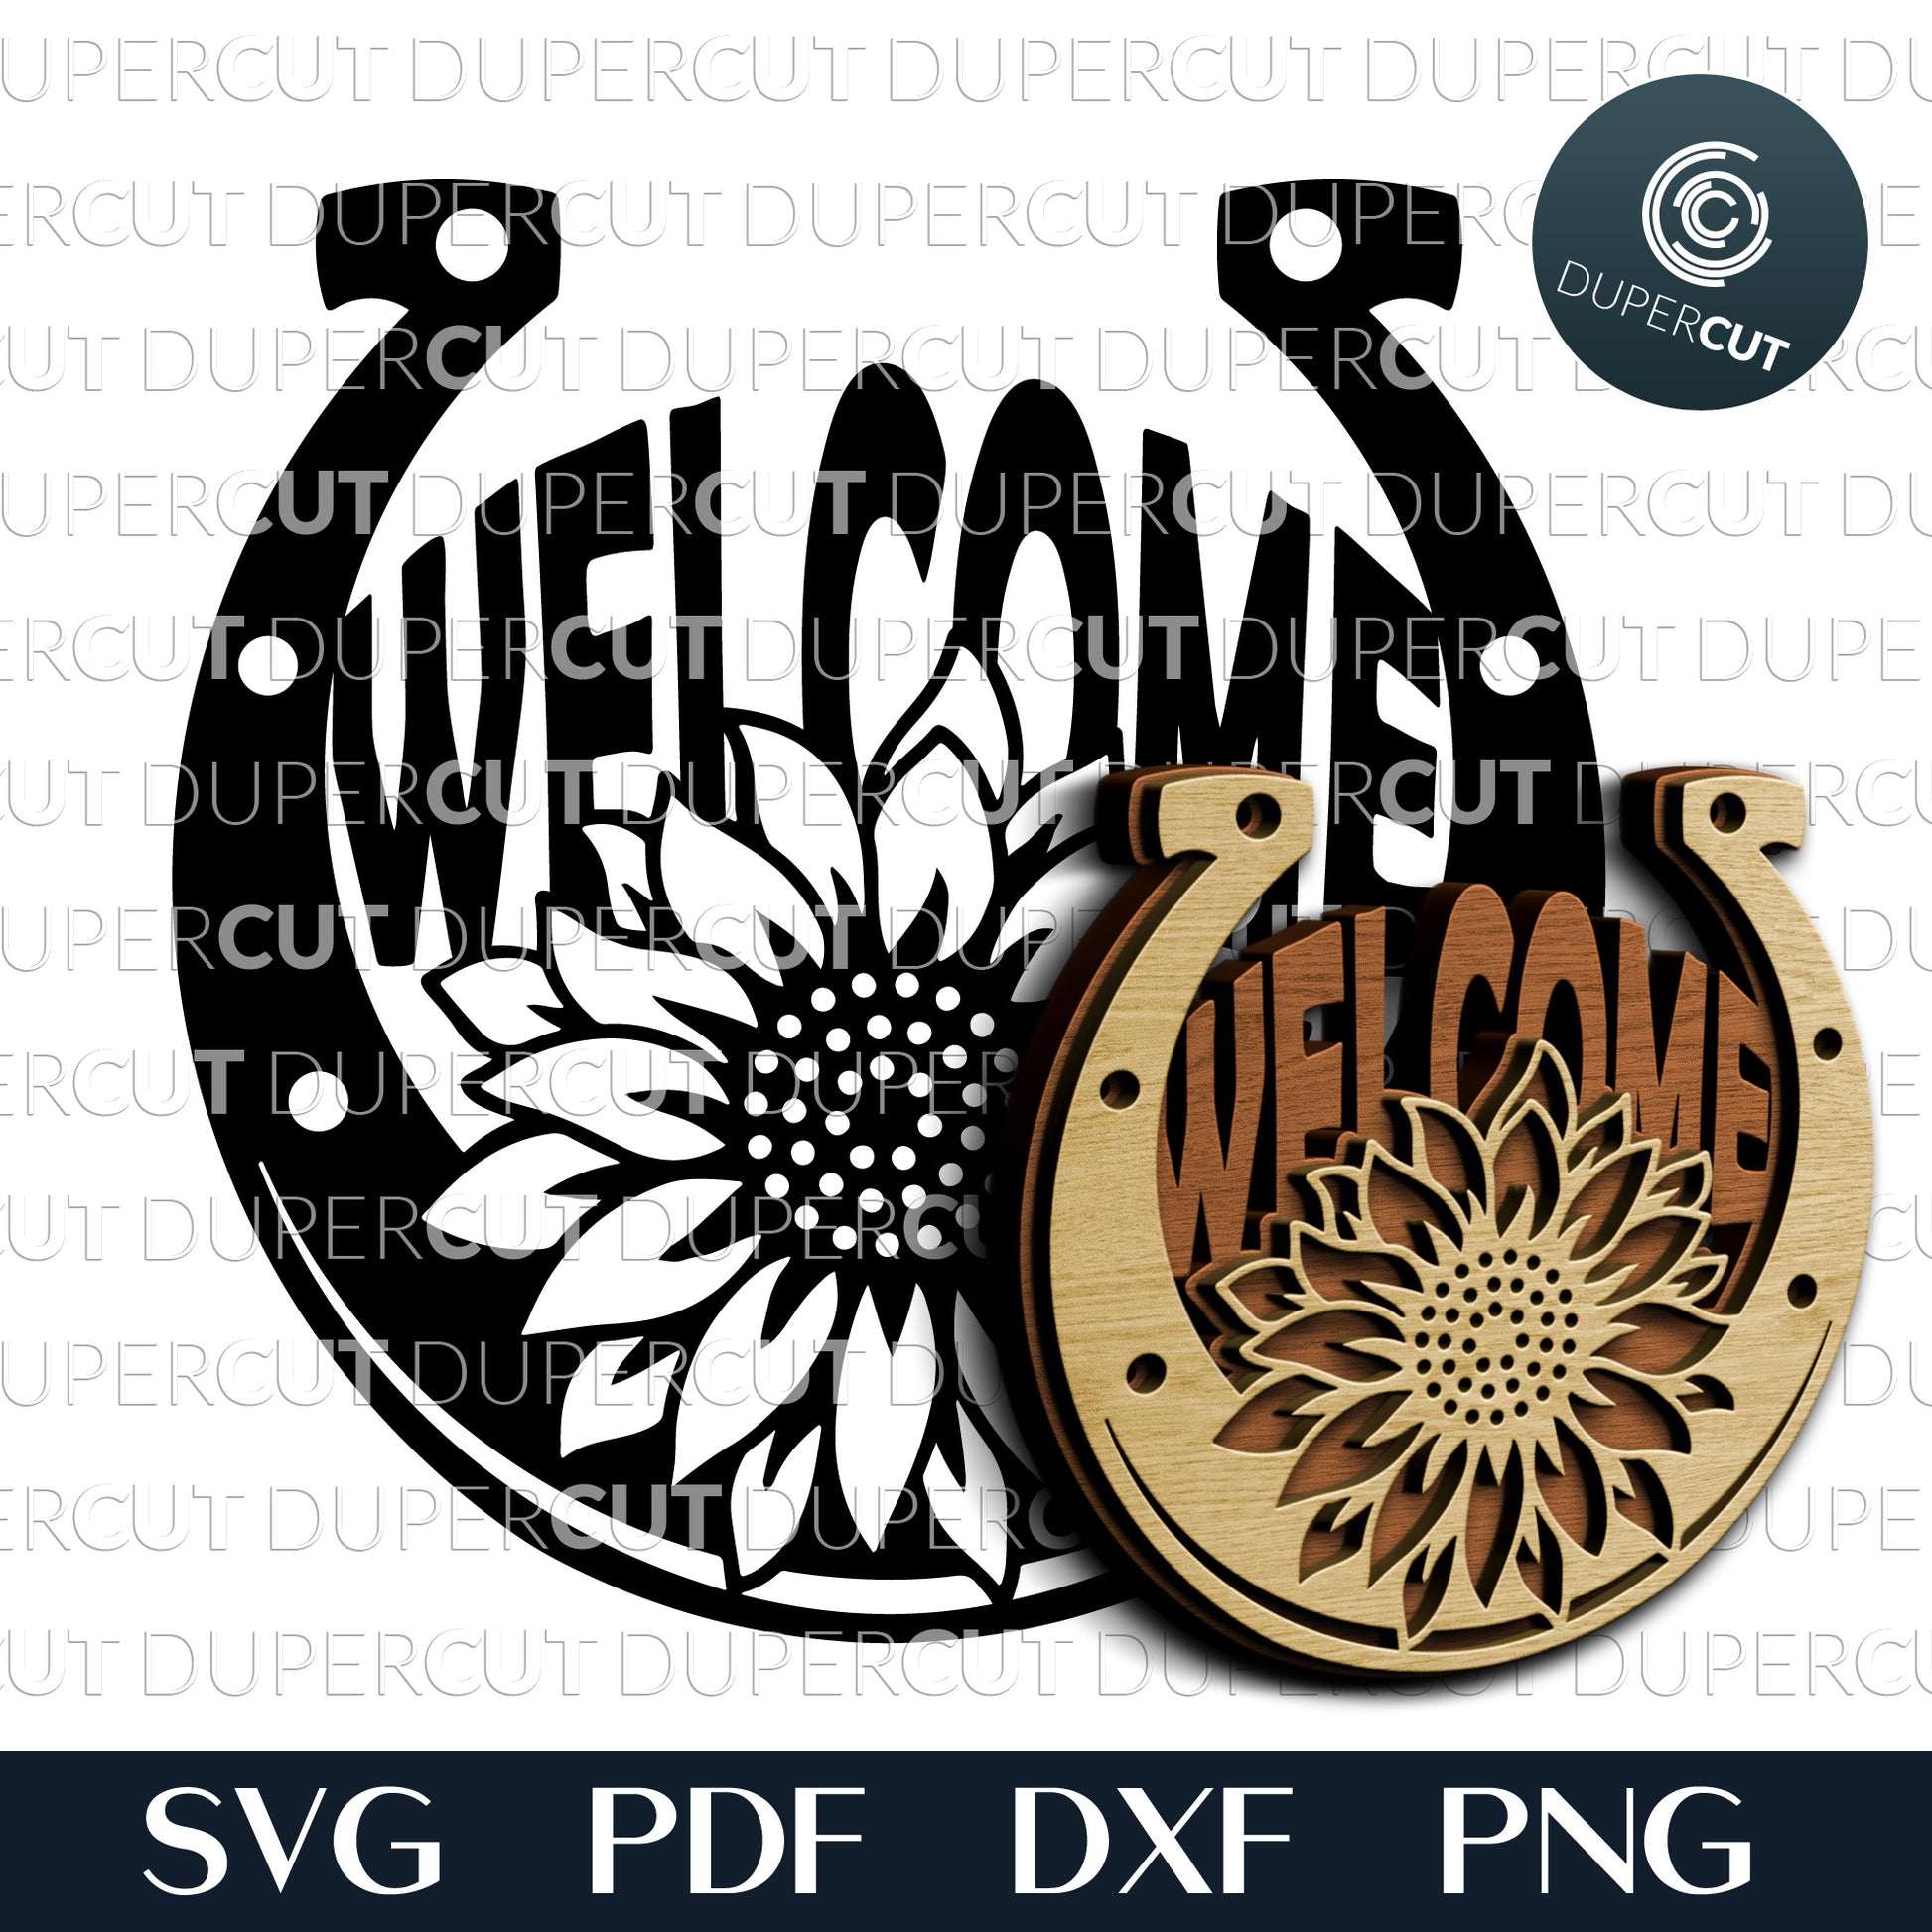 Horseshoe sunflower welcome sign - SVG PDF DXF layered laser cutting files for Glowforge, Cricut, Silhouette Cameo, CNC plasma machines by DuperCut